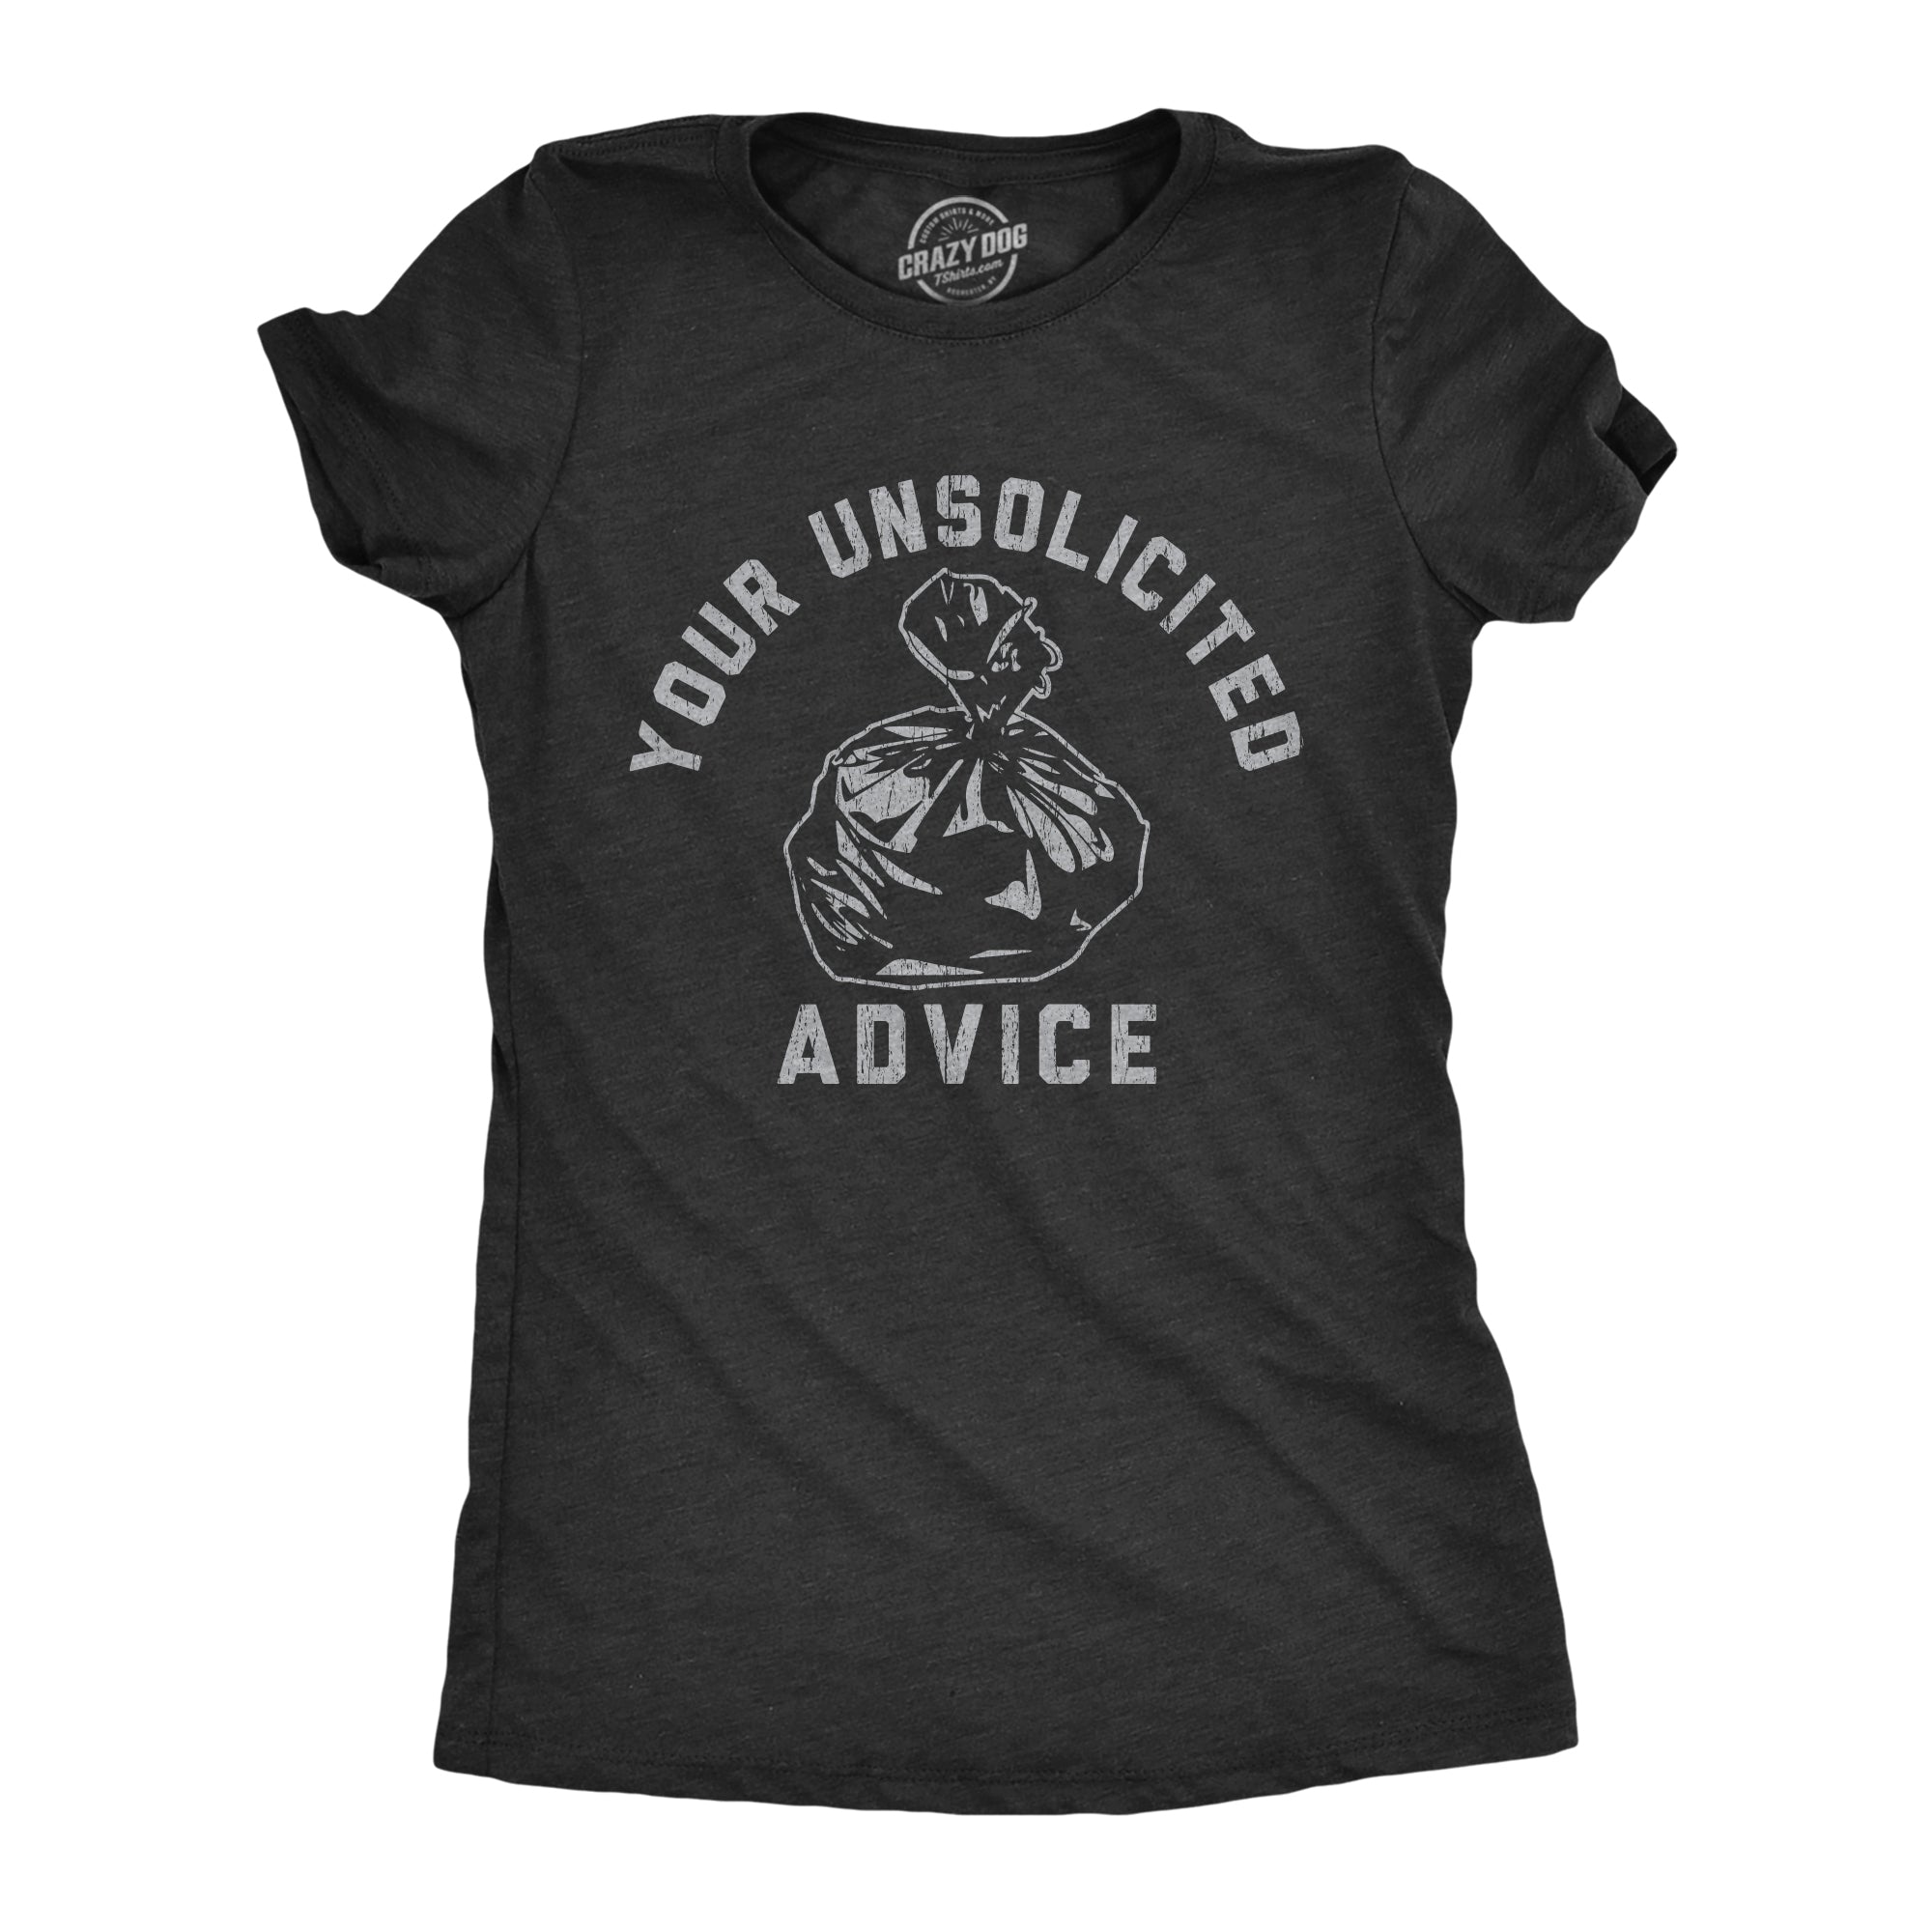 Funny Heather Black - ADVICE Your Unsolicited Advice Womens T Shirt Nerdy Sarcastic Tee